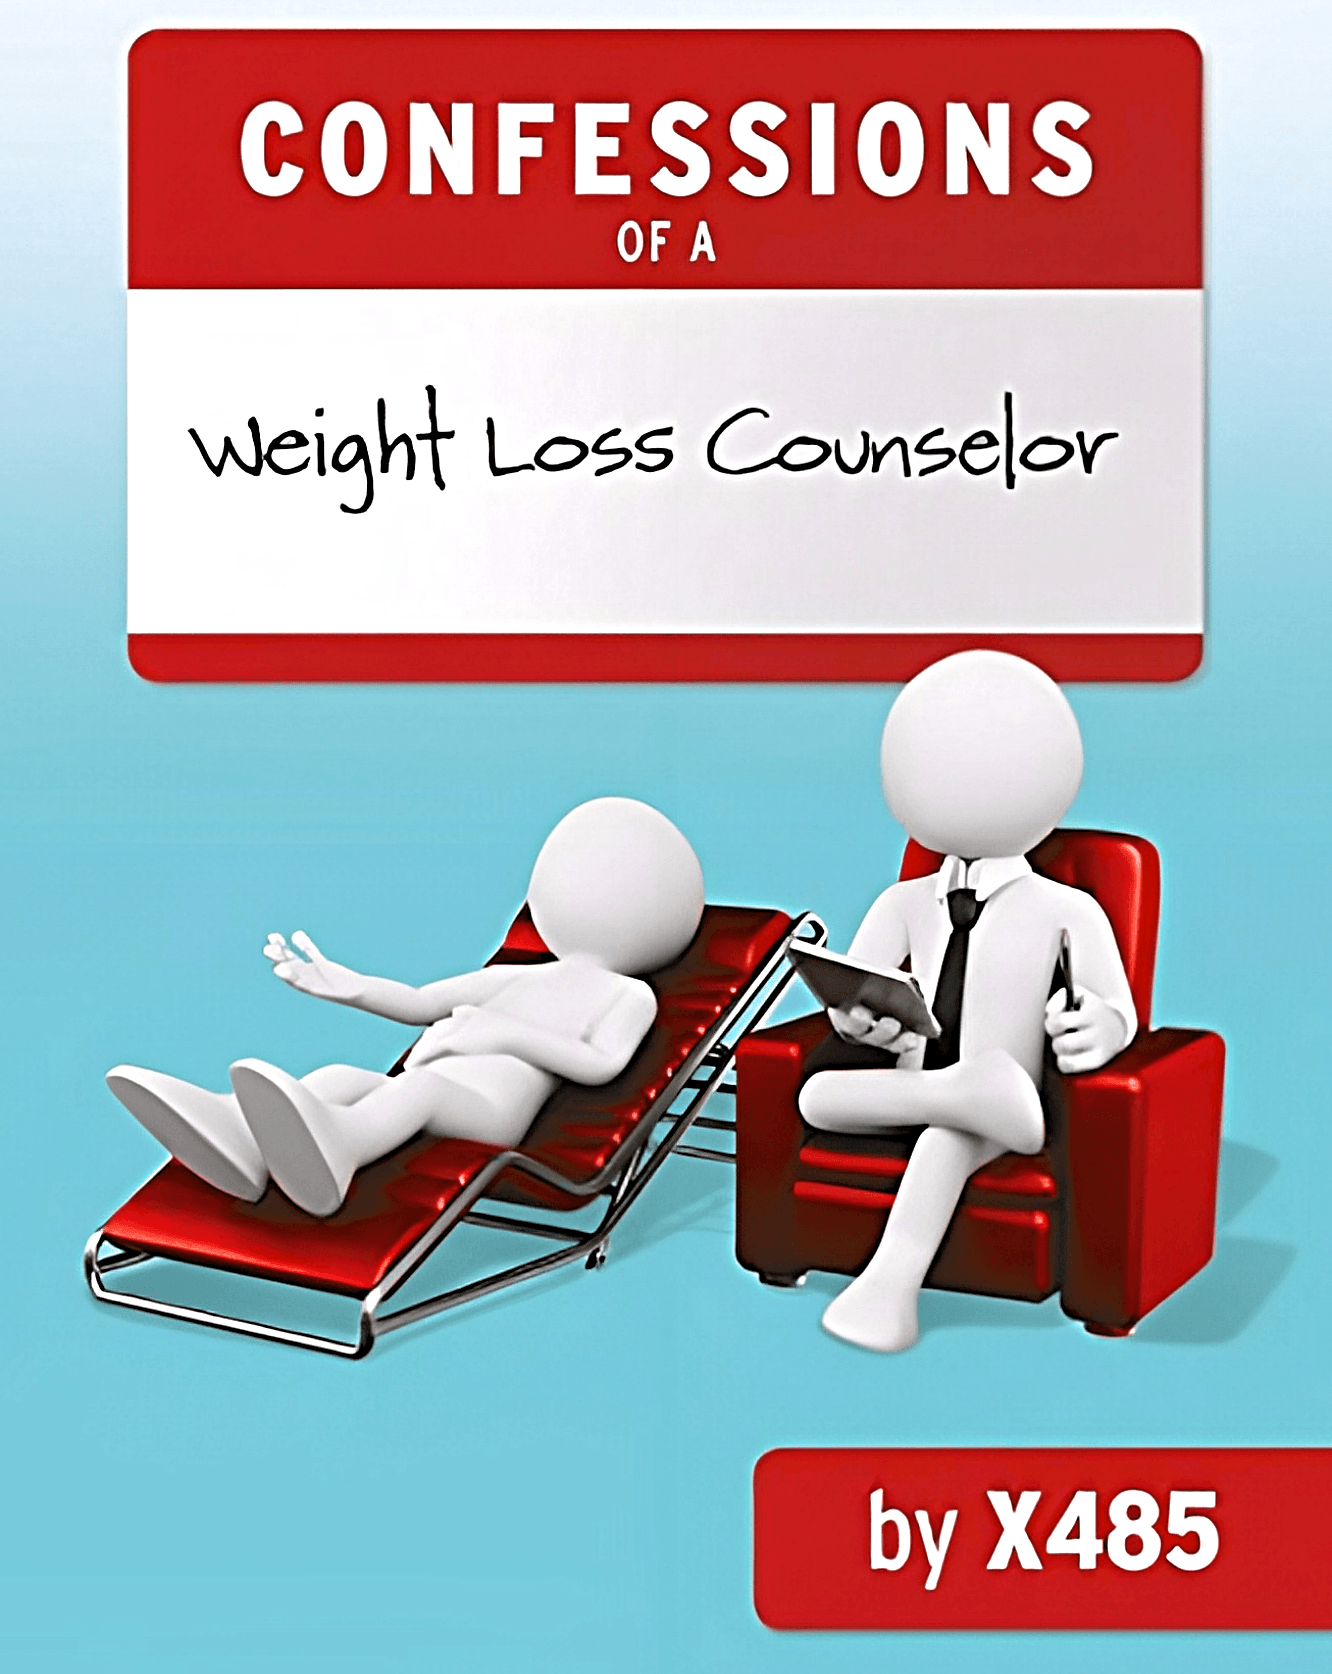 confessions of a weight loss counselor book cover